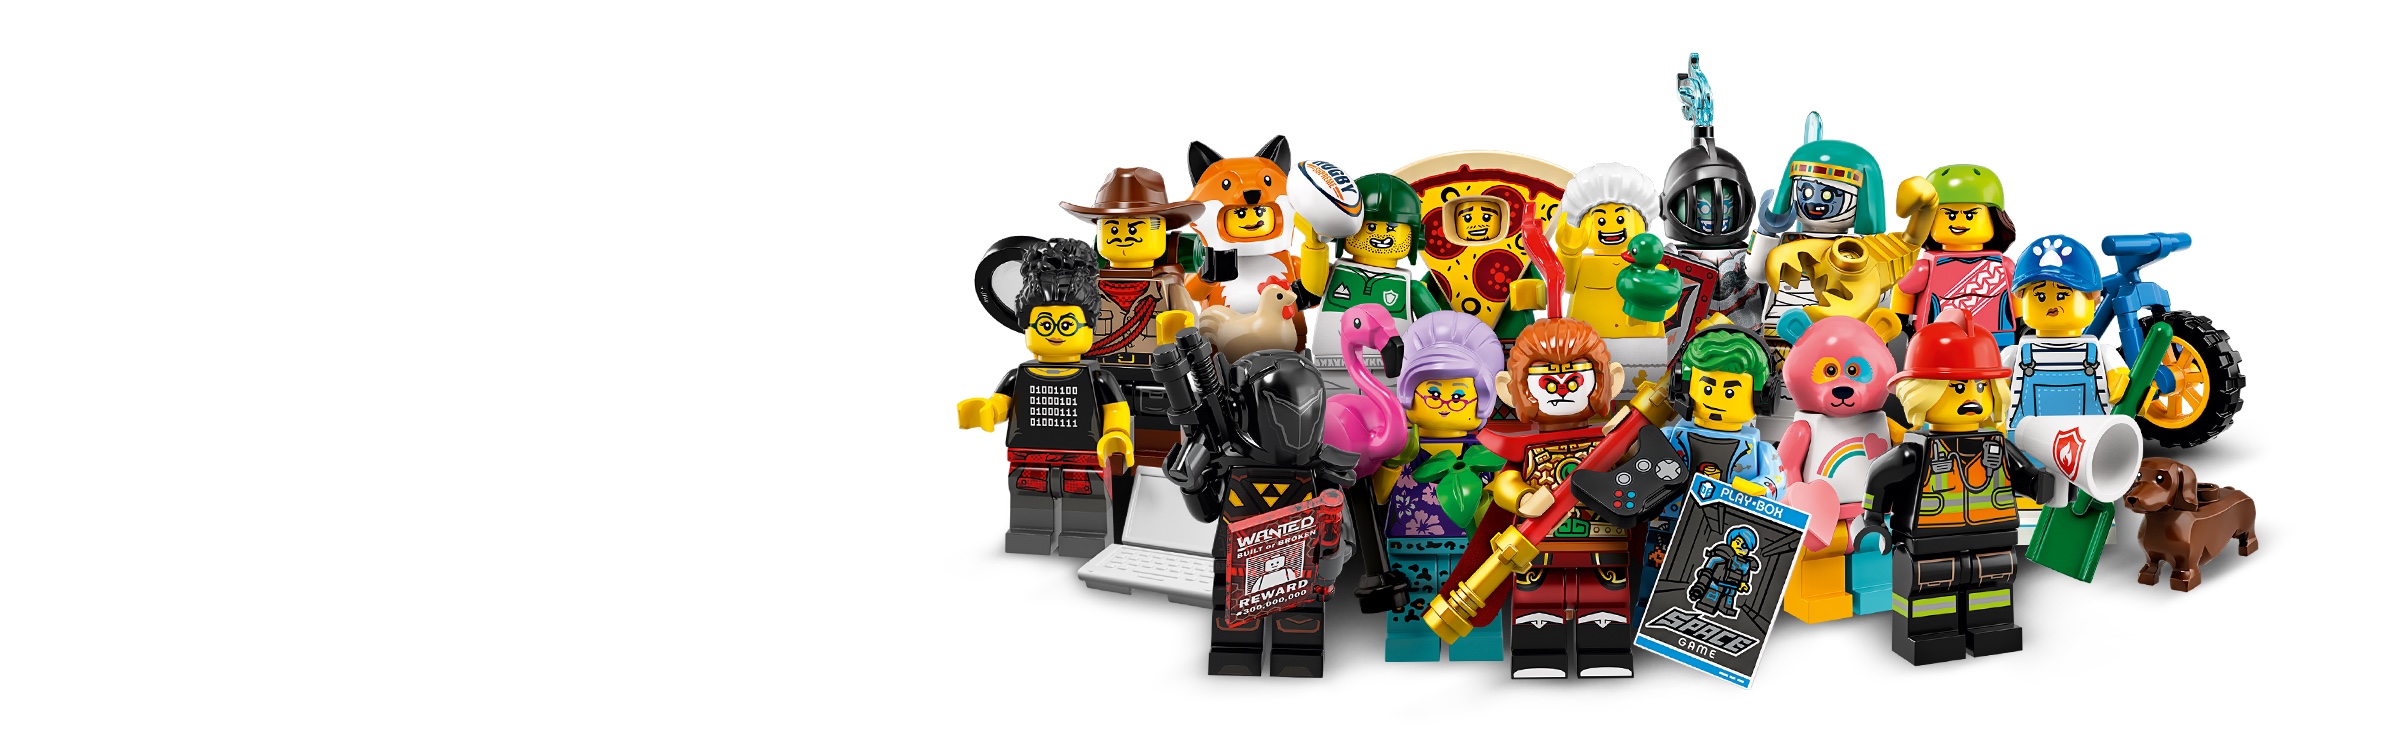 Full Set of 16 in Factory Mystery Bags LEGO 71025 Minifigures Series 19 